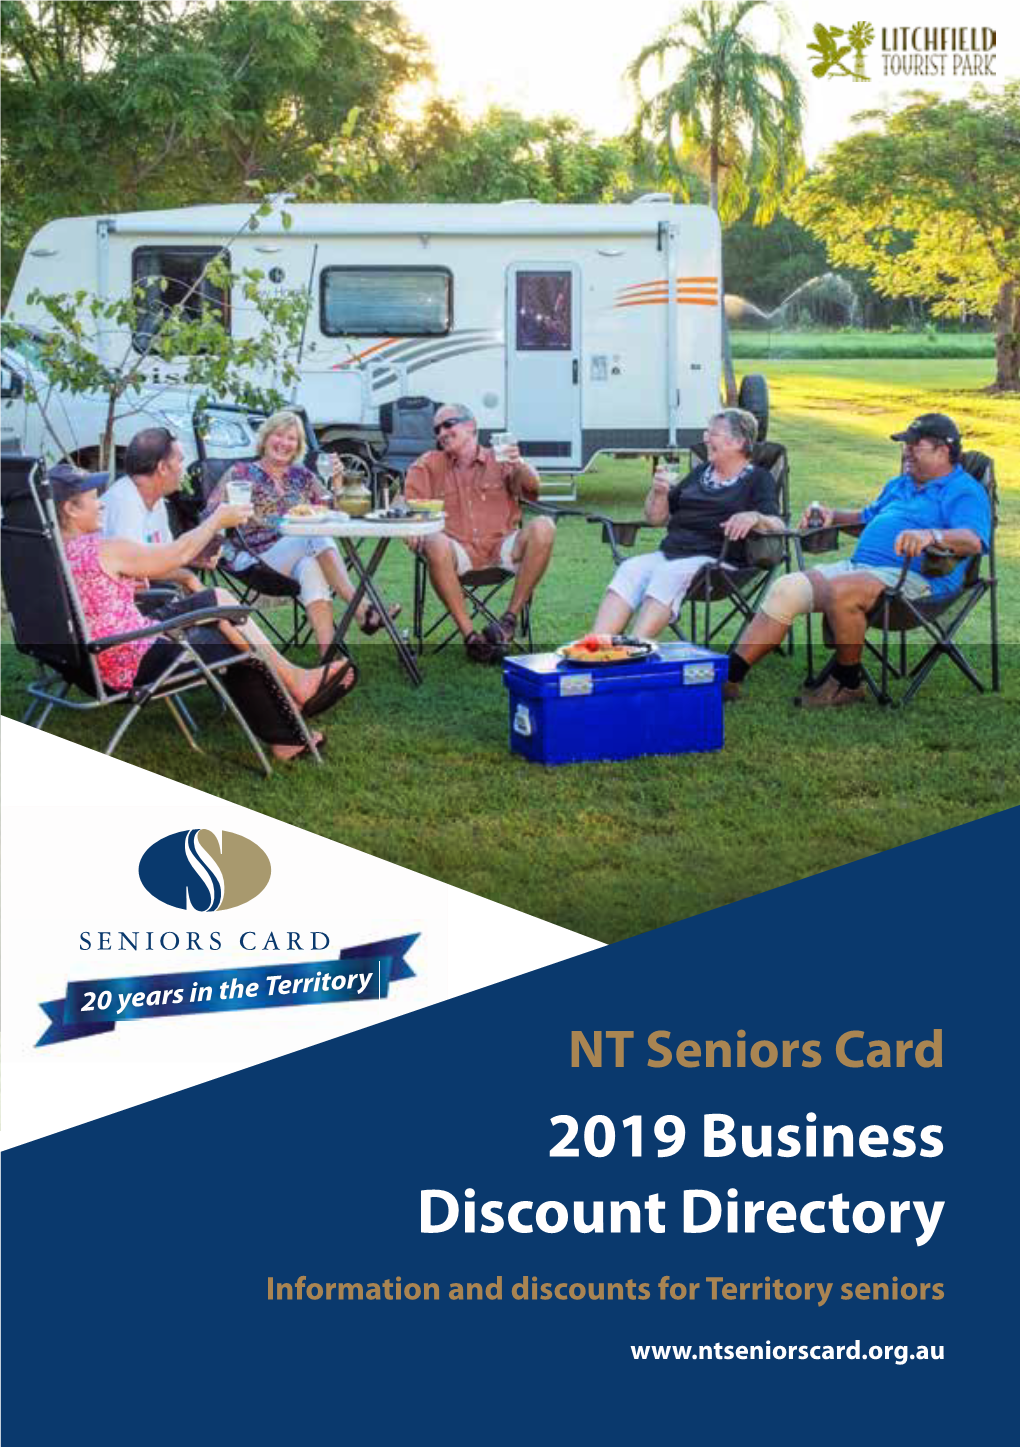 2019 Business Discount Directory Information and Discounts for Territory Seniors